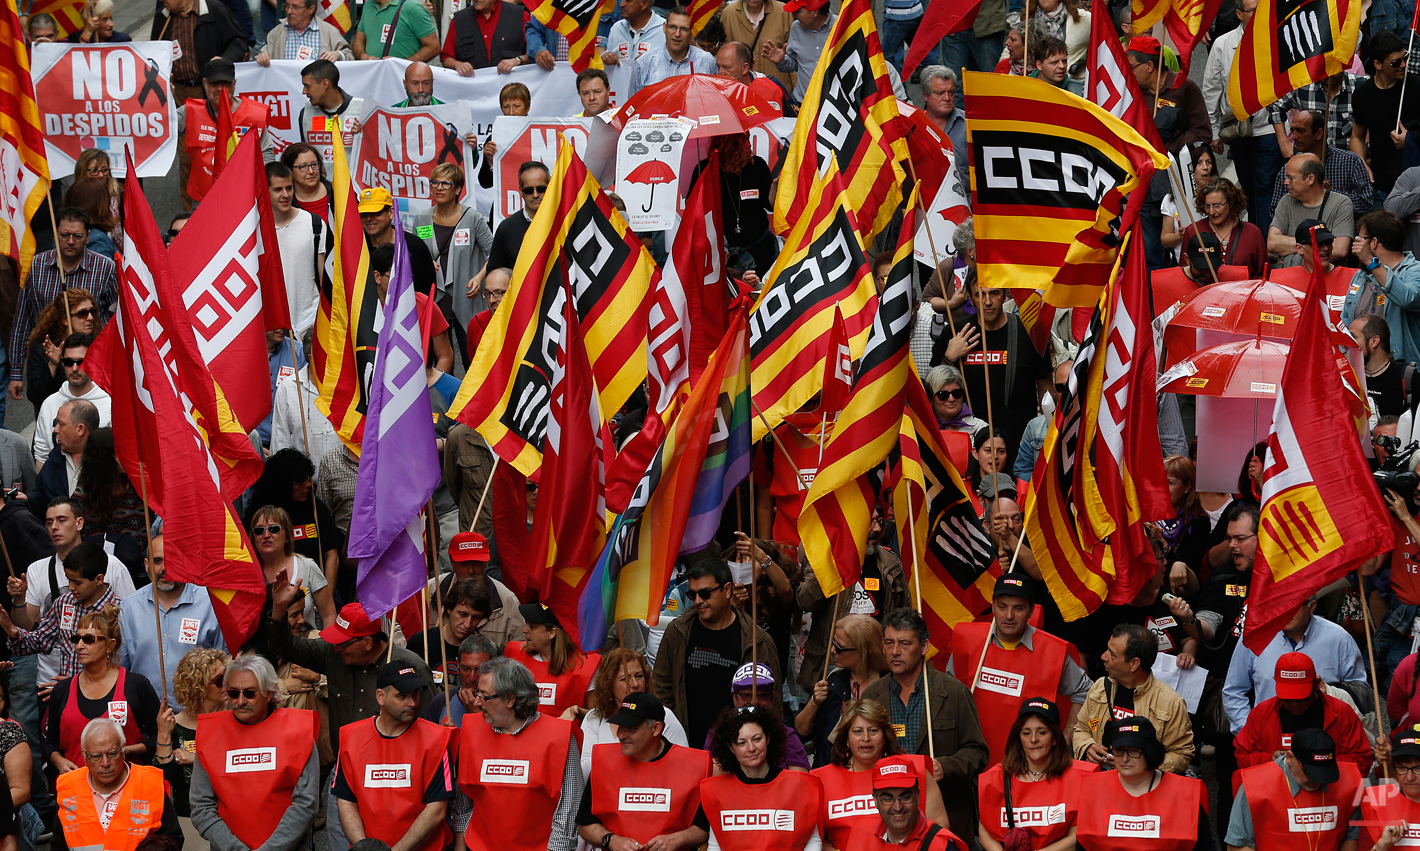  People protest during a May Day rally in the center of Barcelona, Spain, Friday, May 1, 2015. May 1 is celebrated as the International Labor Day or May Day across the world. (AP Photo/Manu Fernandez) 